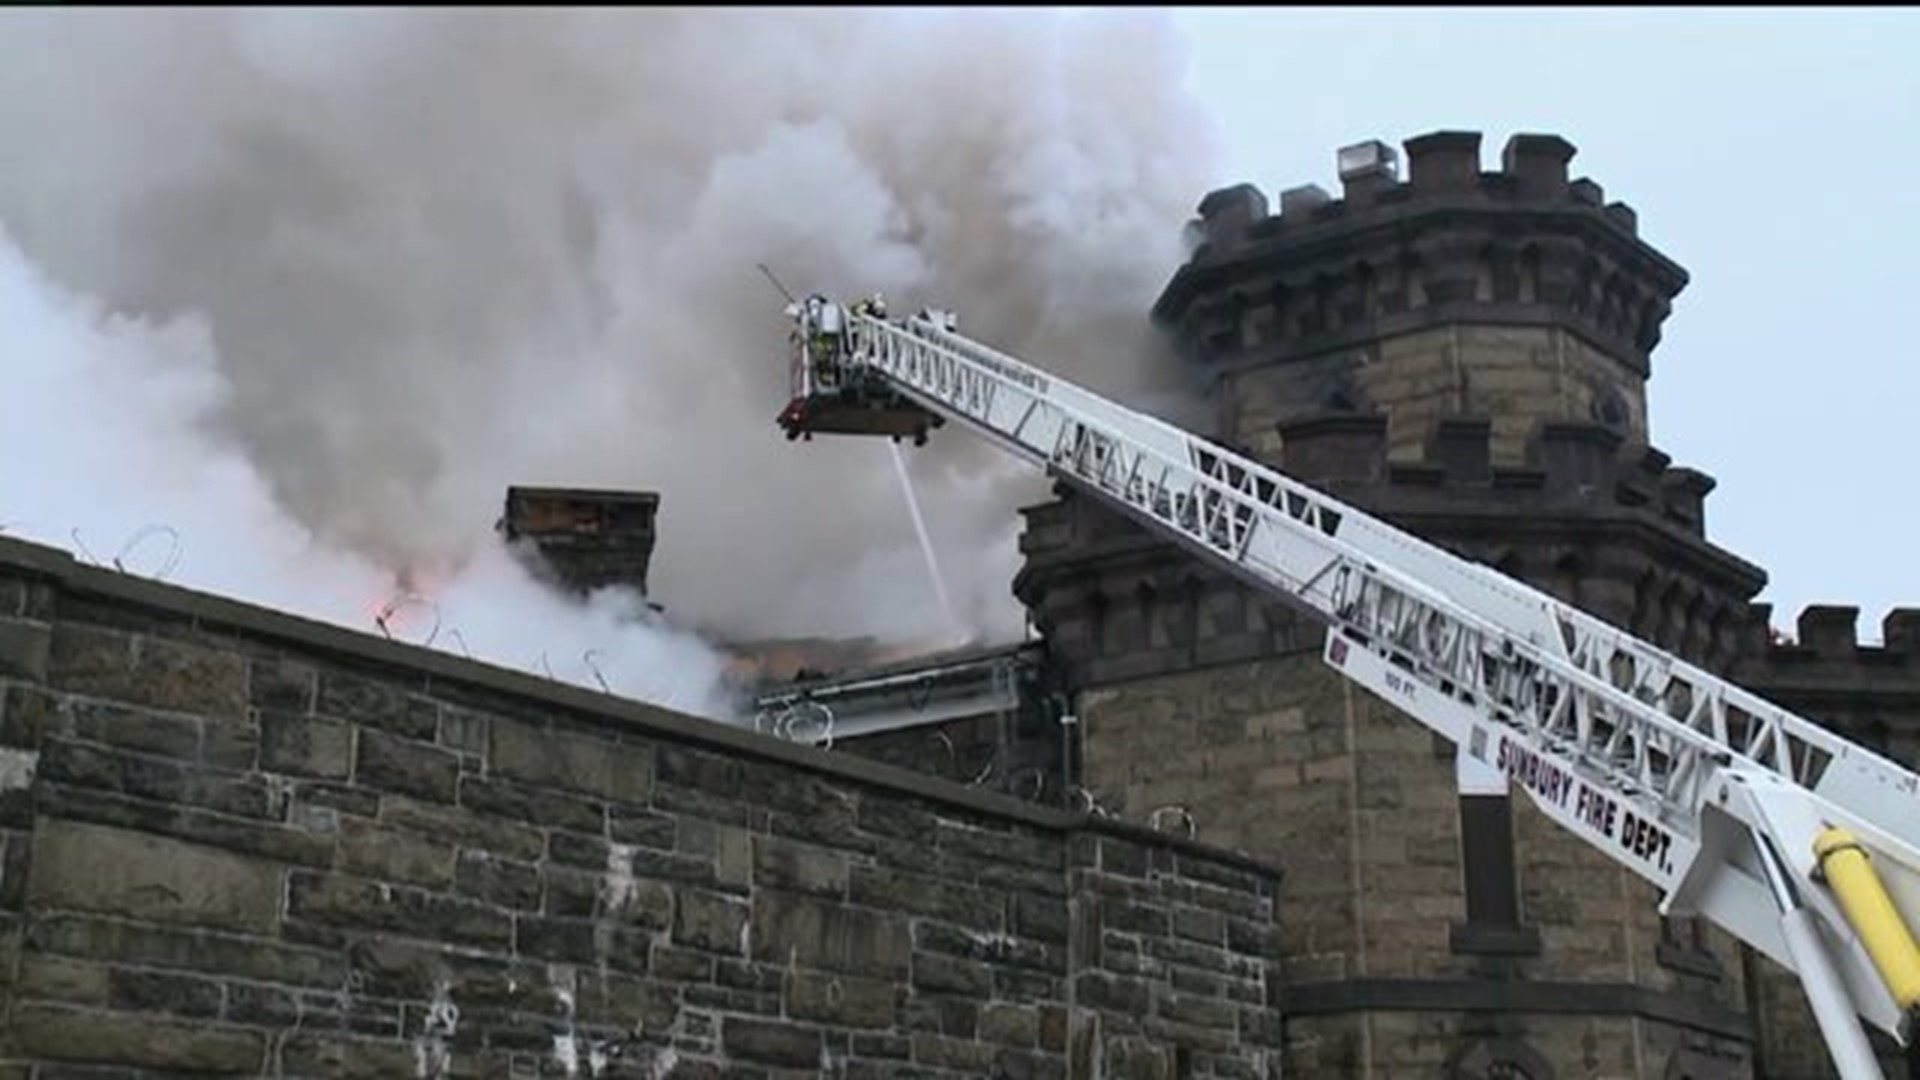 Northumberland County Prison Fire: A Recap